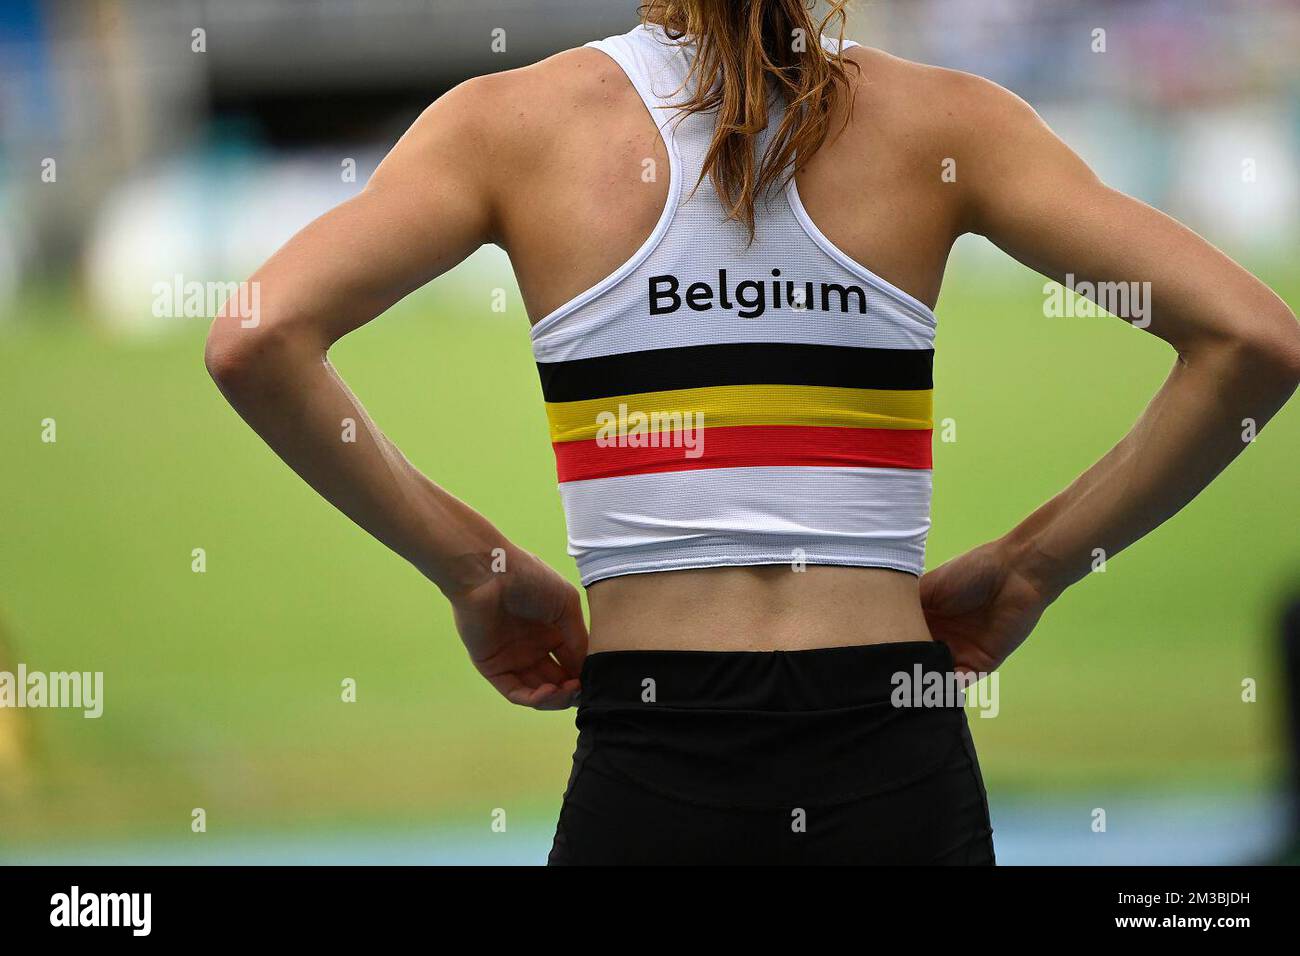 Belgian Merel Maes pictured in action during the high jump event, at the 'World Athletics' World Junior Athletics Championships, on Saturday 06 August 2022 in Cali, Columbia. The World U20 Championships take place from August 1st until August 6th 2022. BELGA PHOTO THOMAS WINDESTAM Stock Photo